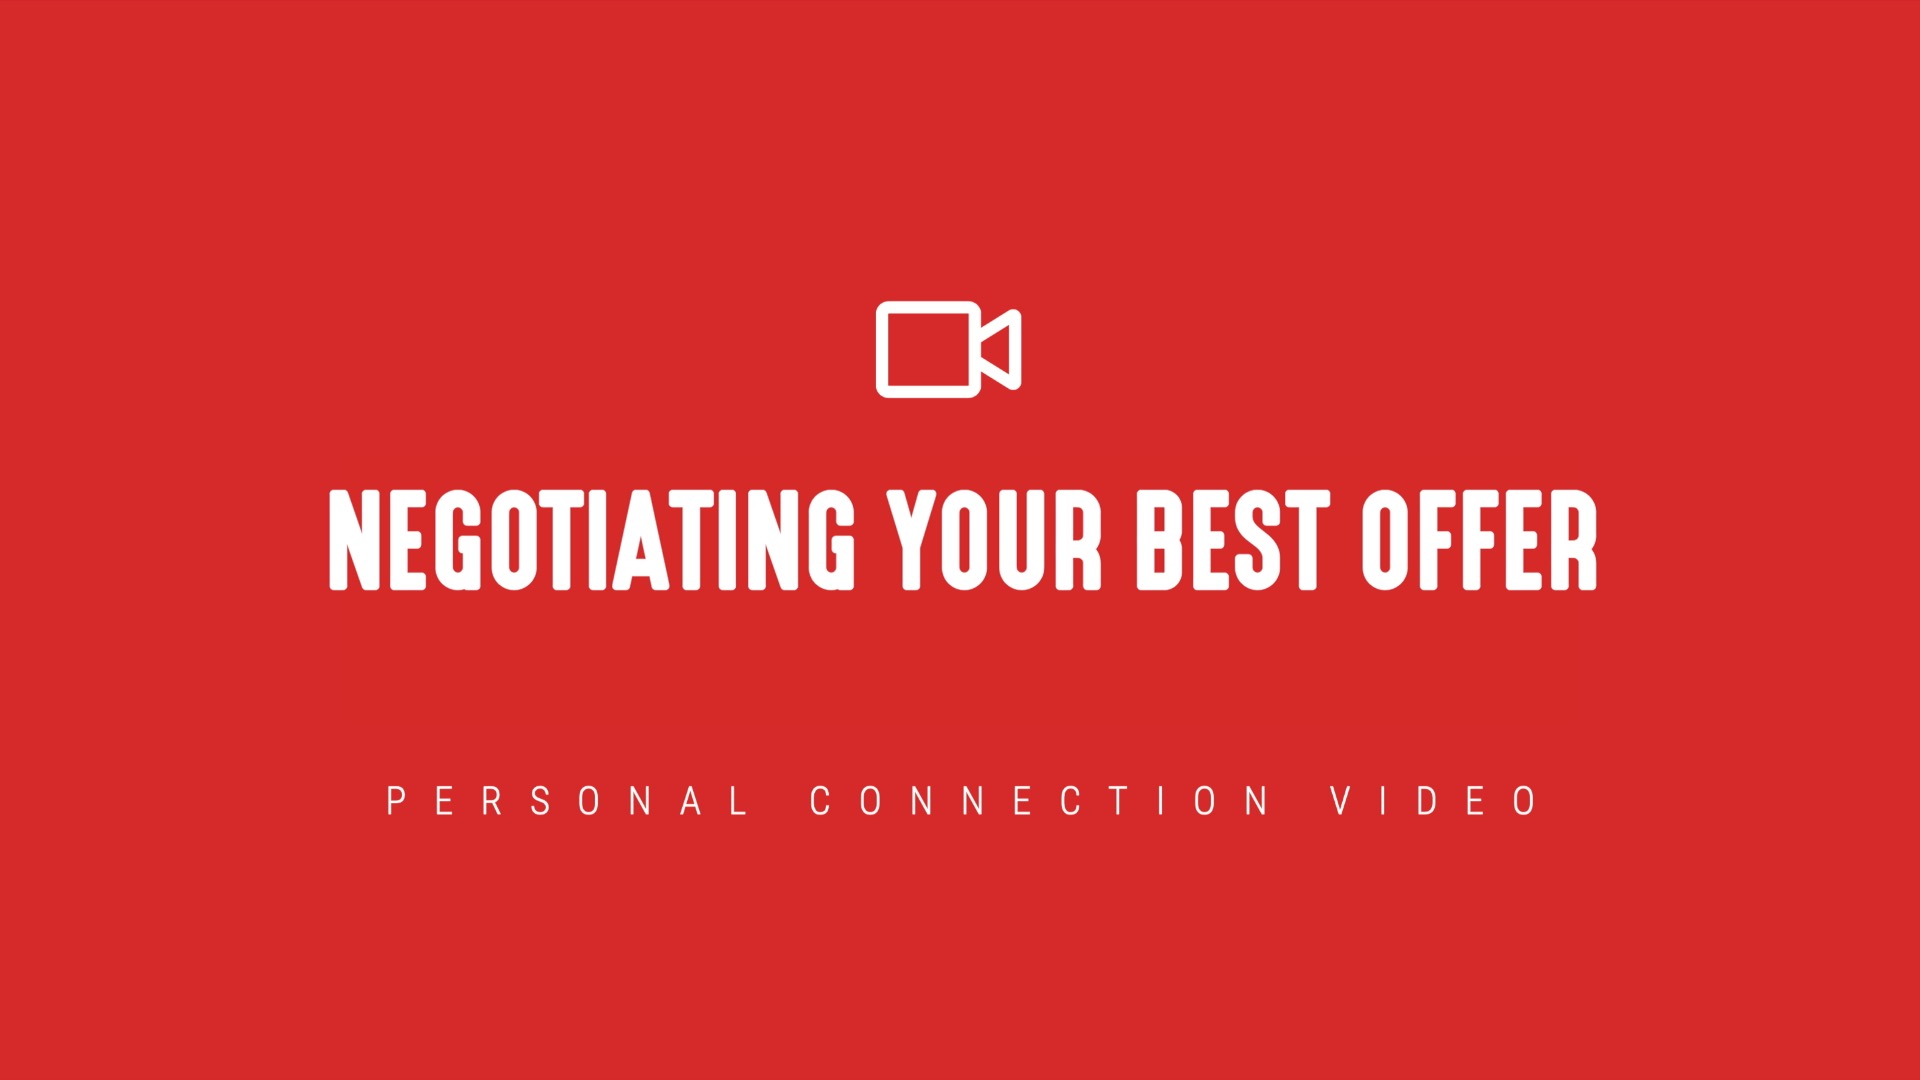 [NEW] Negotiating Your Best Offer - Personal Connection Video